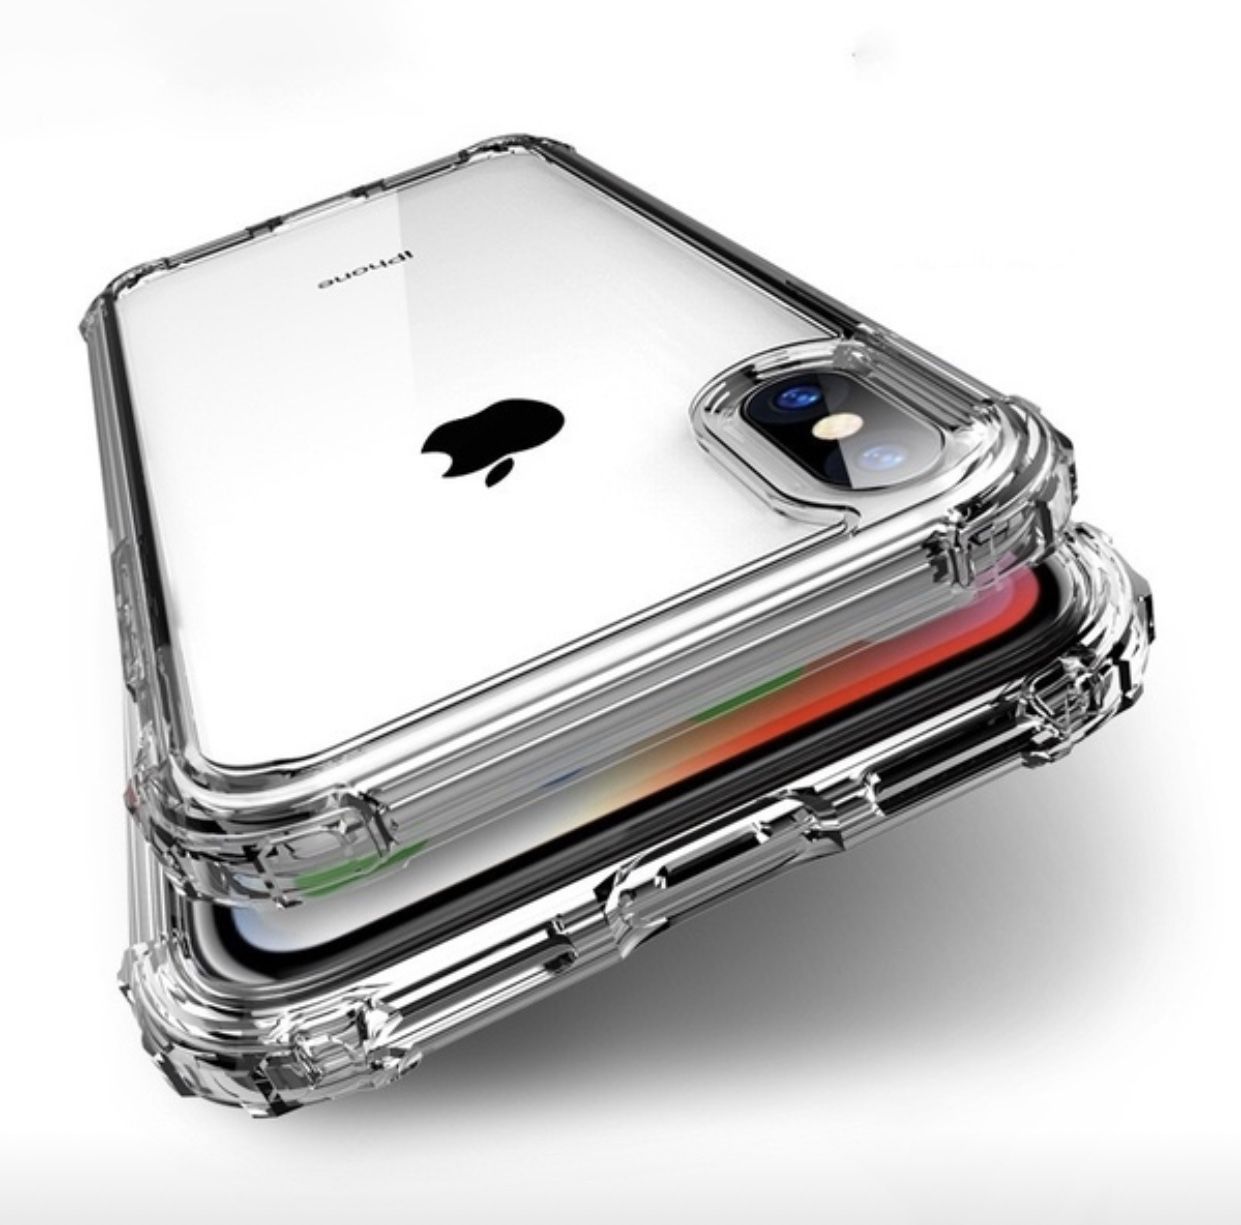 iPhone XS/XS MAX/ 7-8 plus clear cases